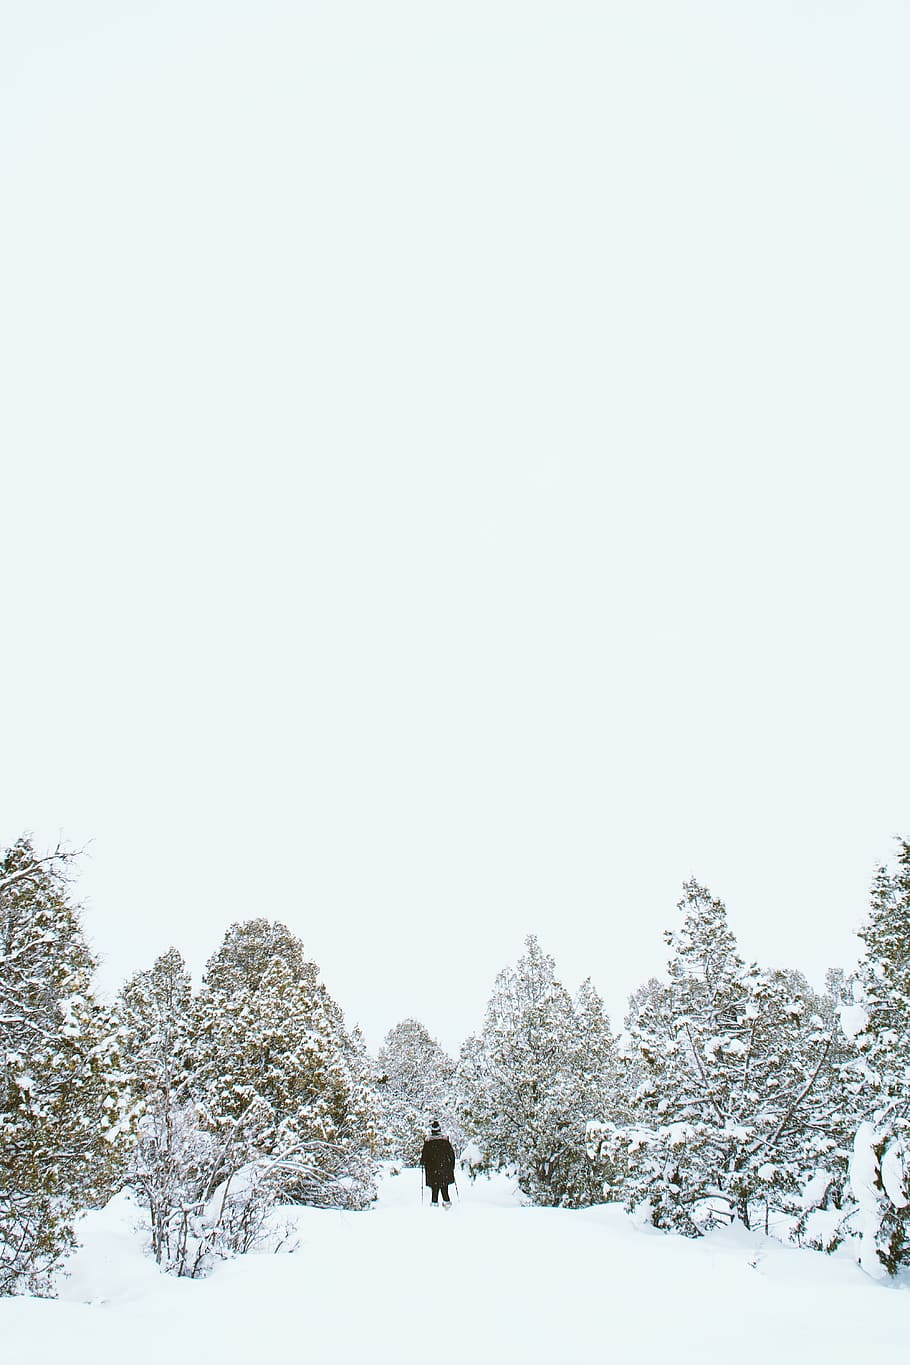 person wearing black jacket standing beside tree during winter season, man skiing in middle of pine trees